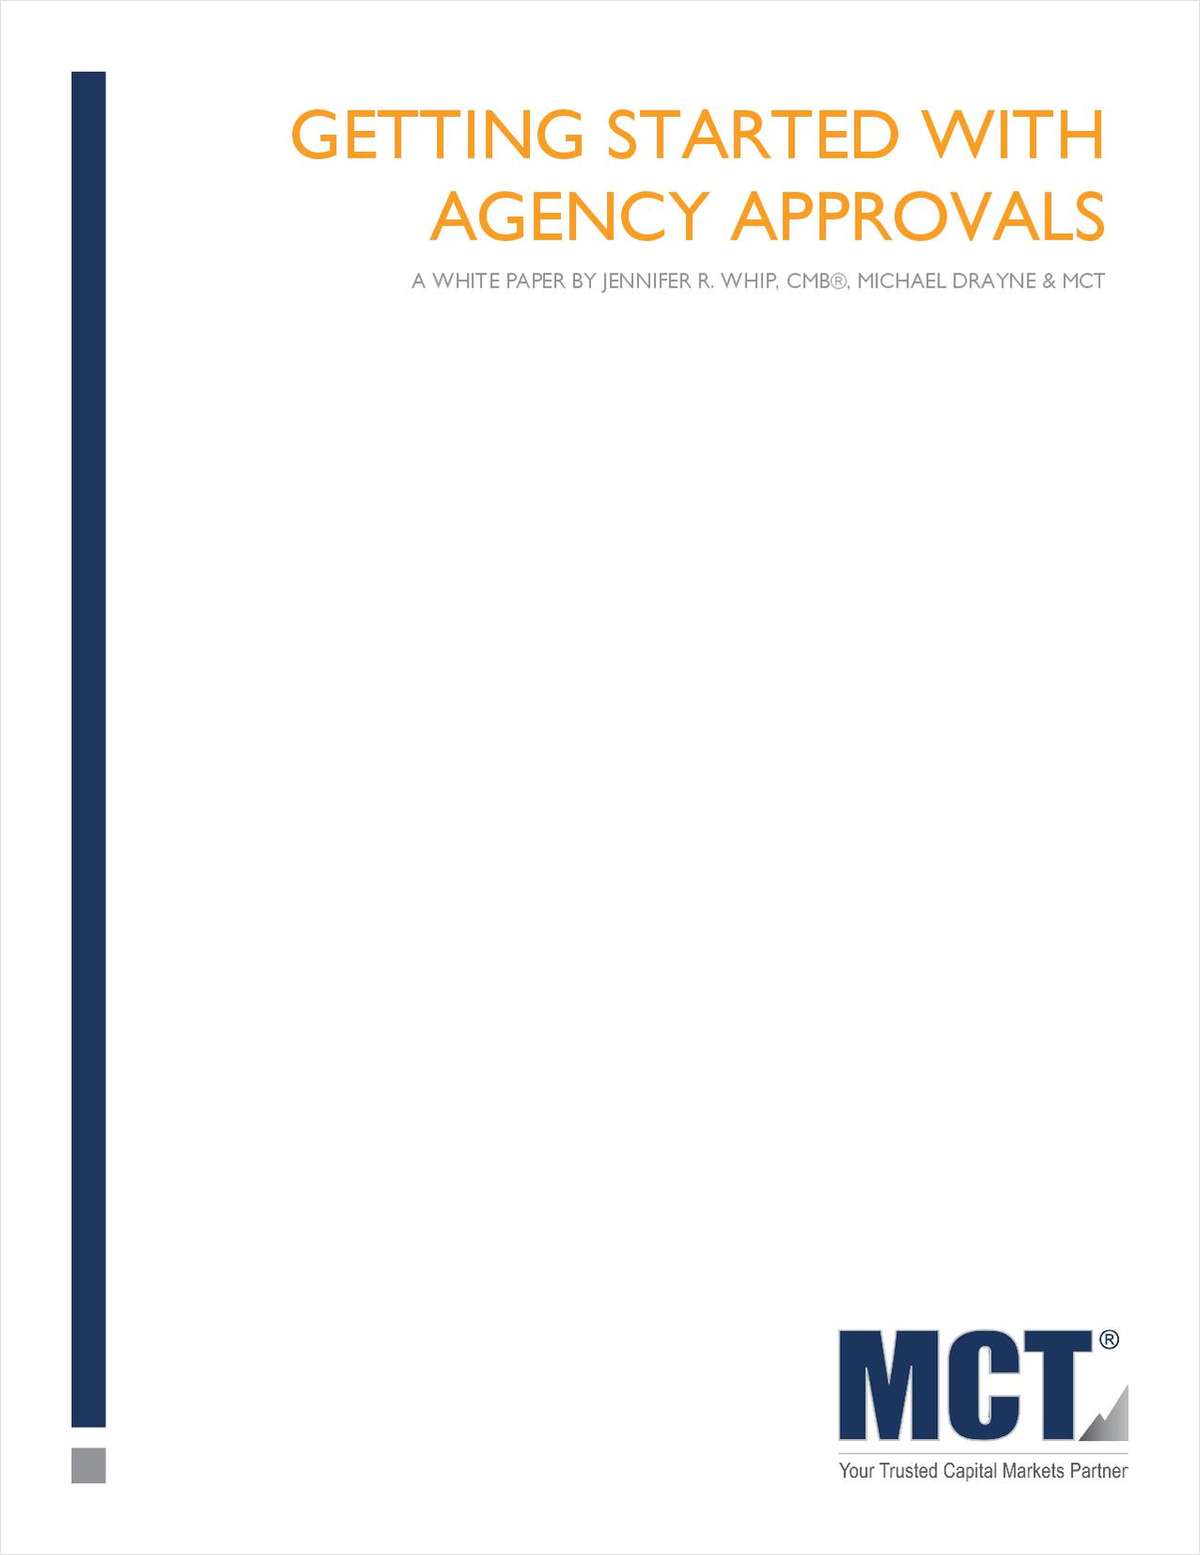 Getting Started With Agency Approvals link